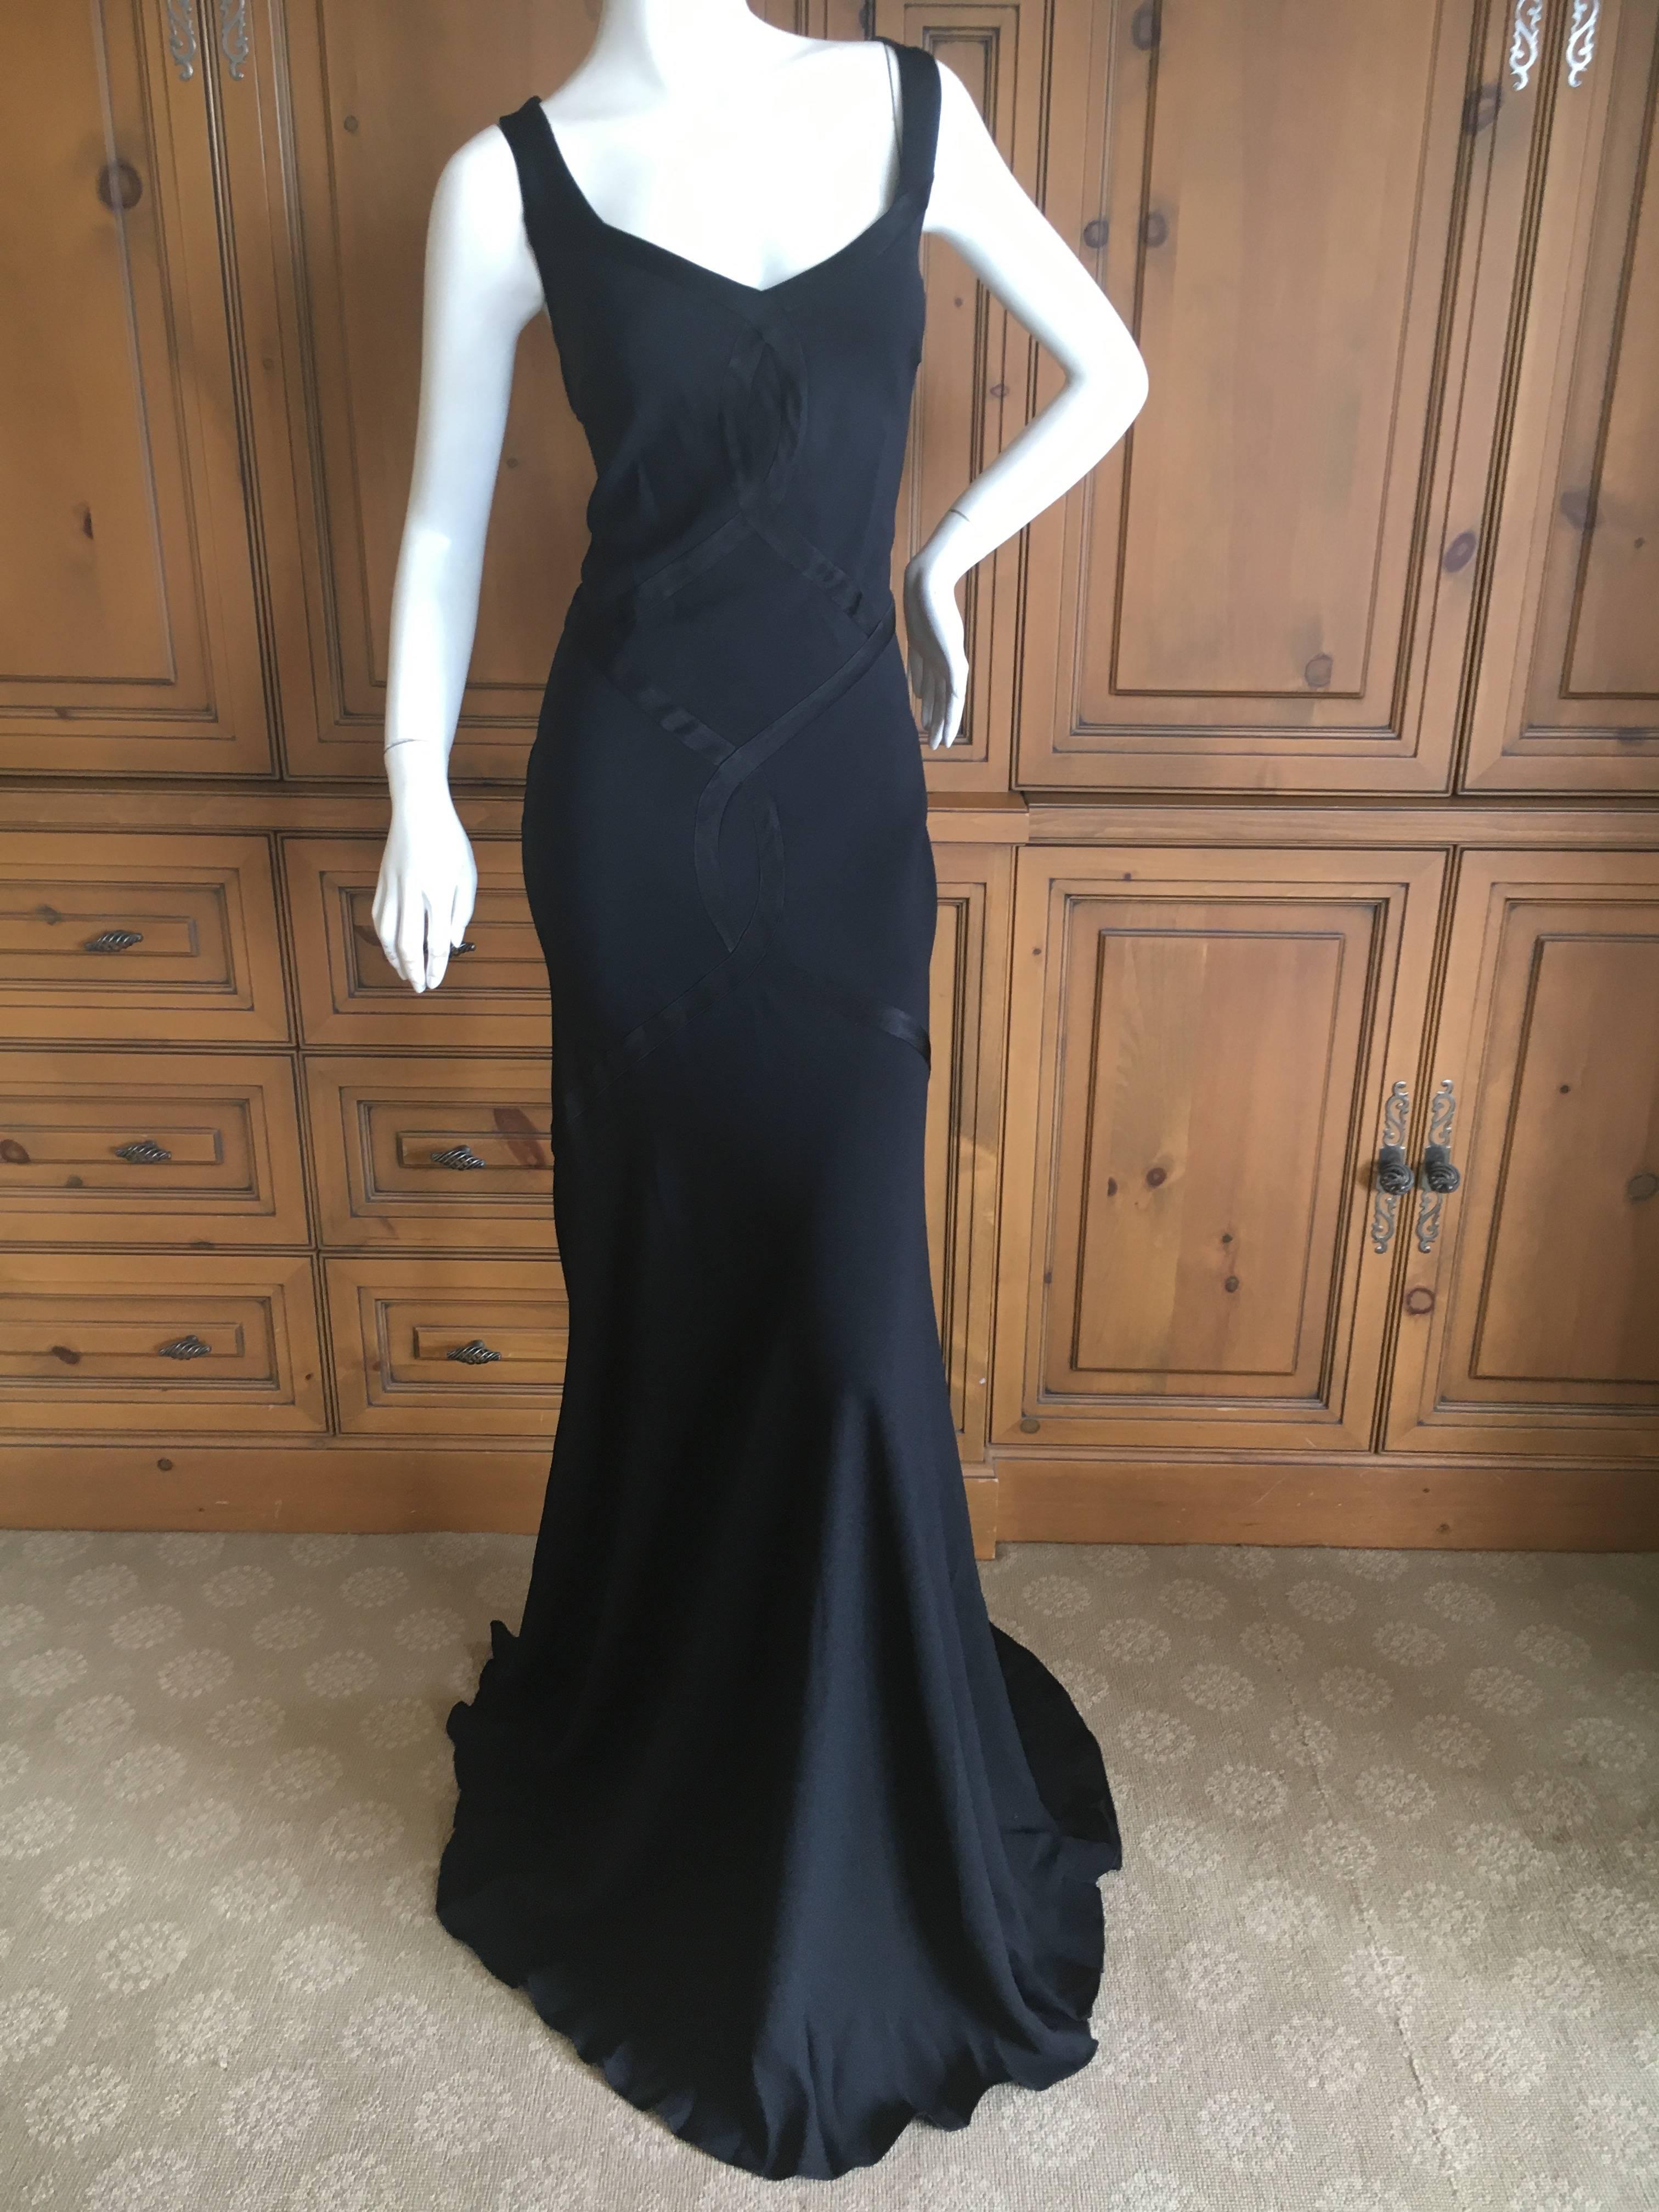 John Galliano 2001 Black Bias Cut Evening Dress with Train New with Tags Size 46 For Sale 1